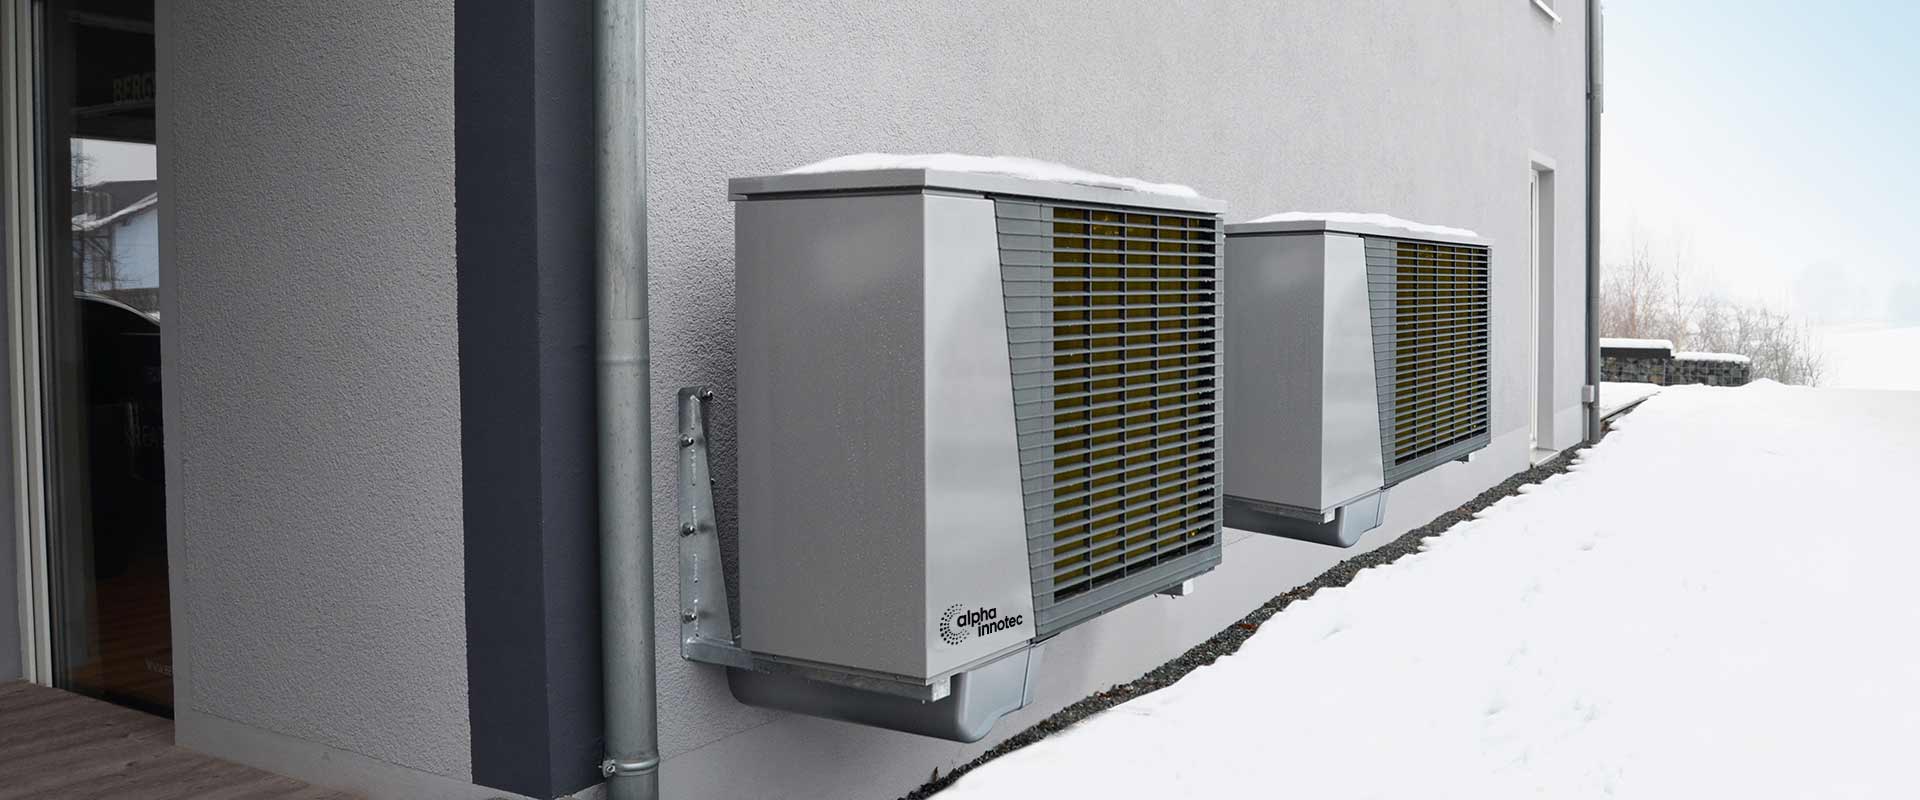 Two air/water-heat pumps LWD are installed outside next to each other, surrounded by snow.